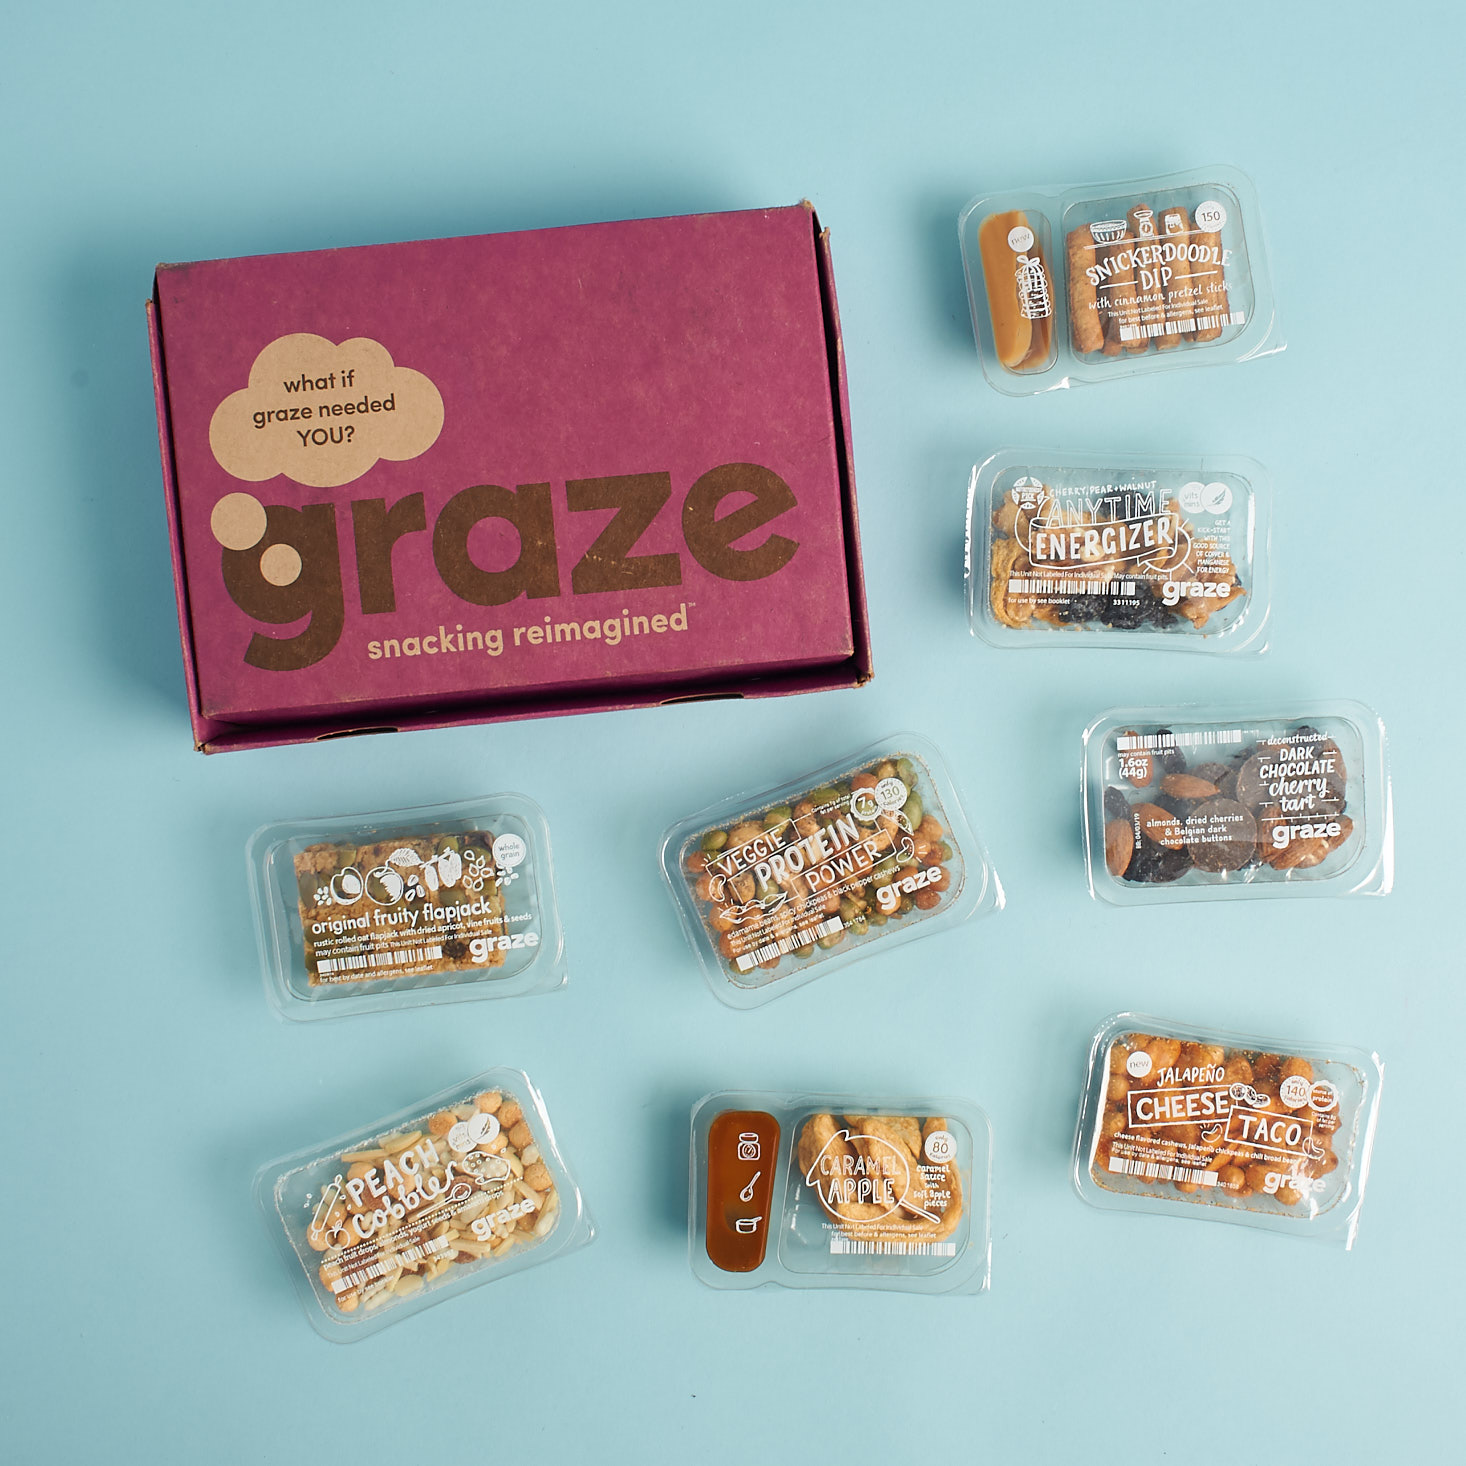 Graze 8 Snack Variety Box Review + Free Box Coupon – February 2019